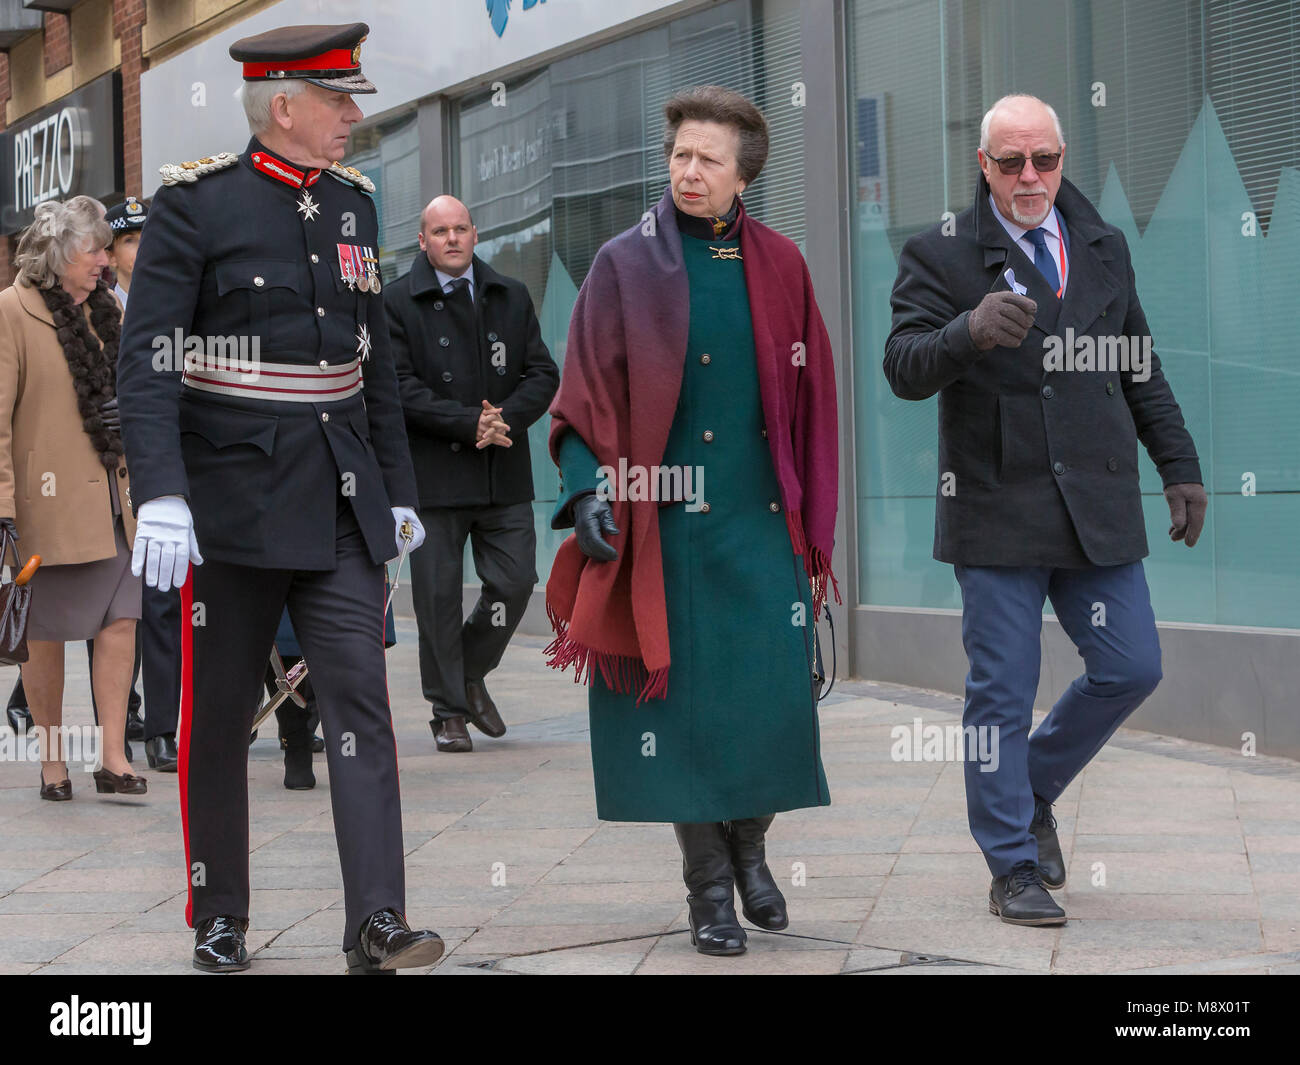 Warrington, UK. 20th Mar, 2018. HRH Princess Anne attends 25 year anniversary of IRA bomb, Warrington. Colin Parry leads Her Royal Highness Princess Anne, The Princess Royal and Thomas David Briggs, MBE, KstJ, Lord Lieutenant of Cheshire (Executive Chair) Credit: John Hopkins/Alamy Live News Stock Photo